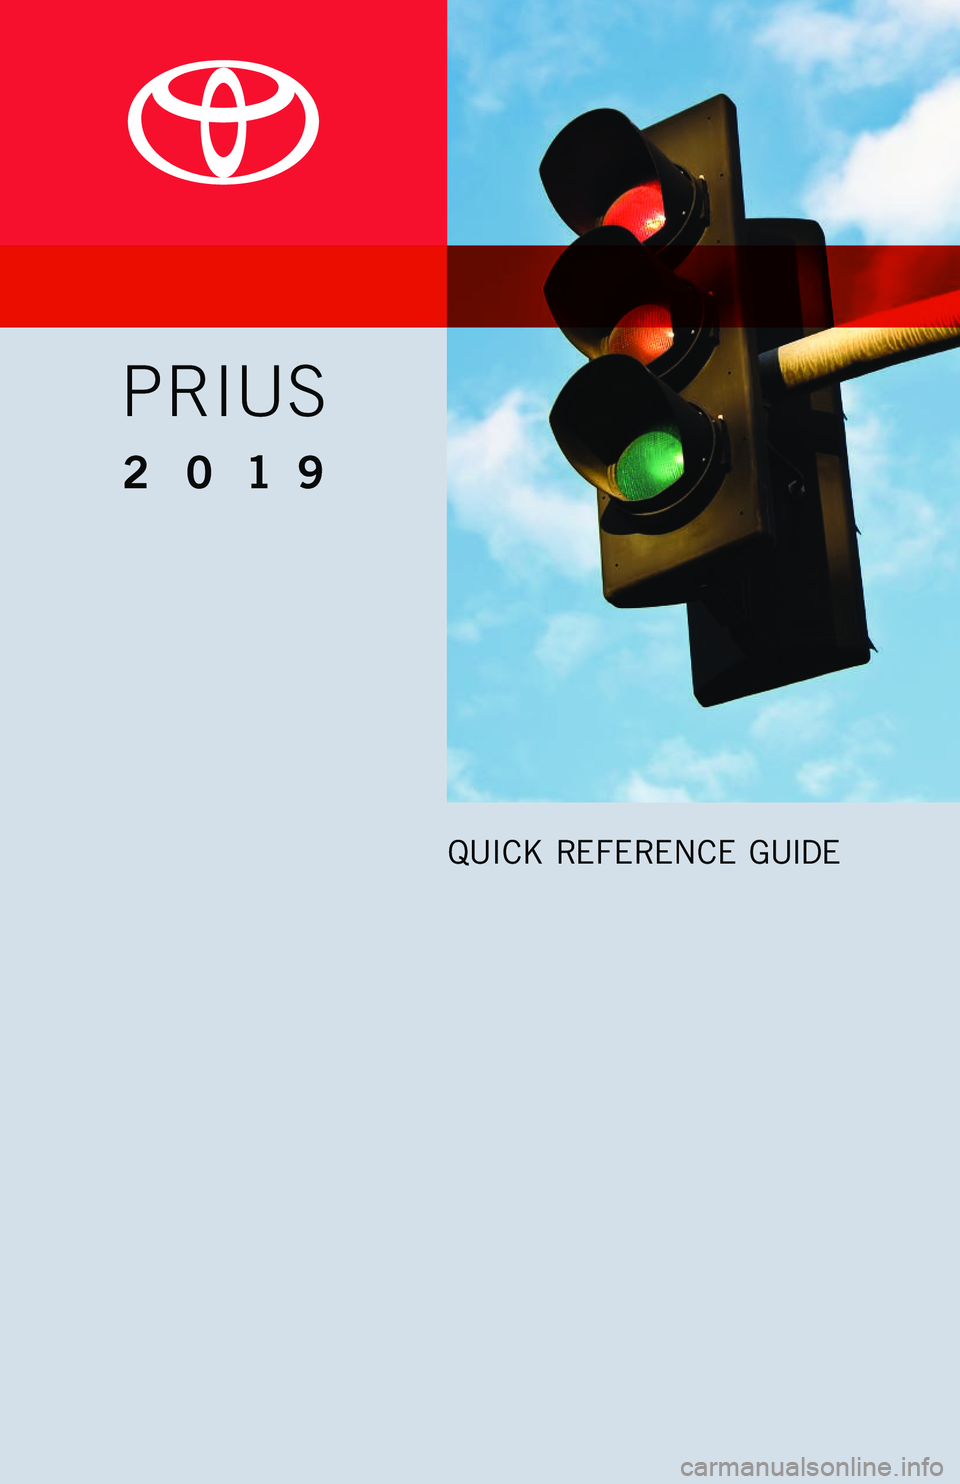 TOYOTA PRIUS 2019  Owners Manual (in English) PRIUS
2019 
QUICK REFERENCE GUIDE
116674_18-MKG-12451-MY18 Toyota_Prius_QRG_R1.indd   211/26/18   9:02 PM   